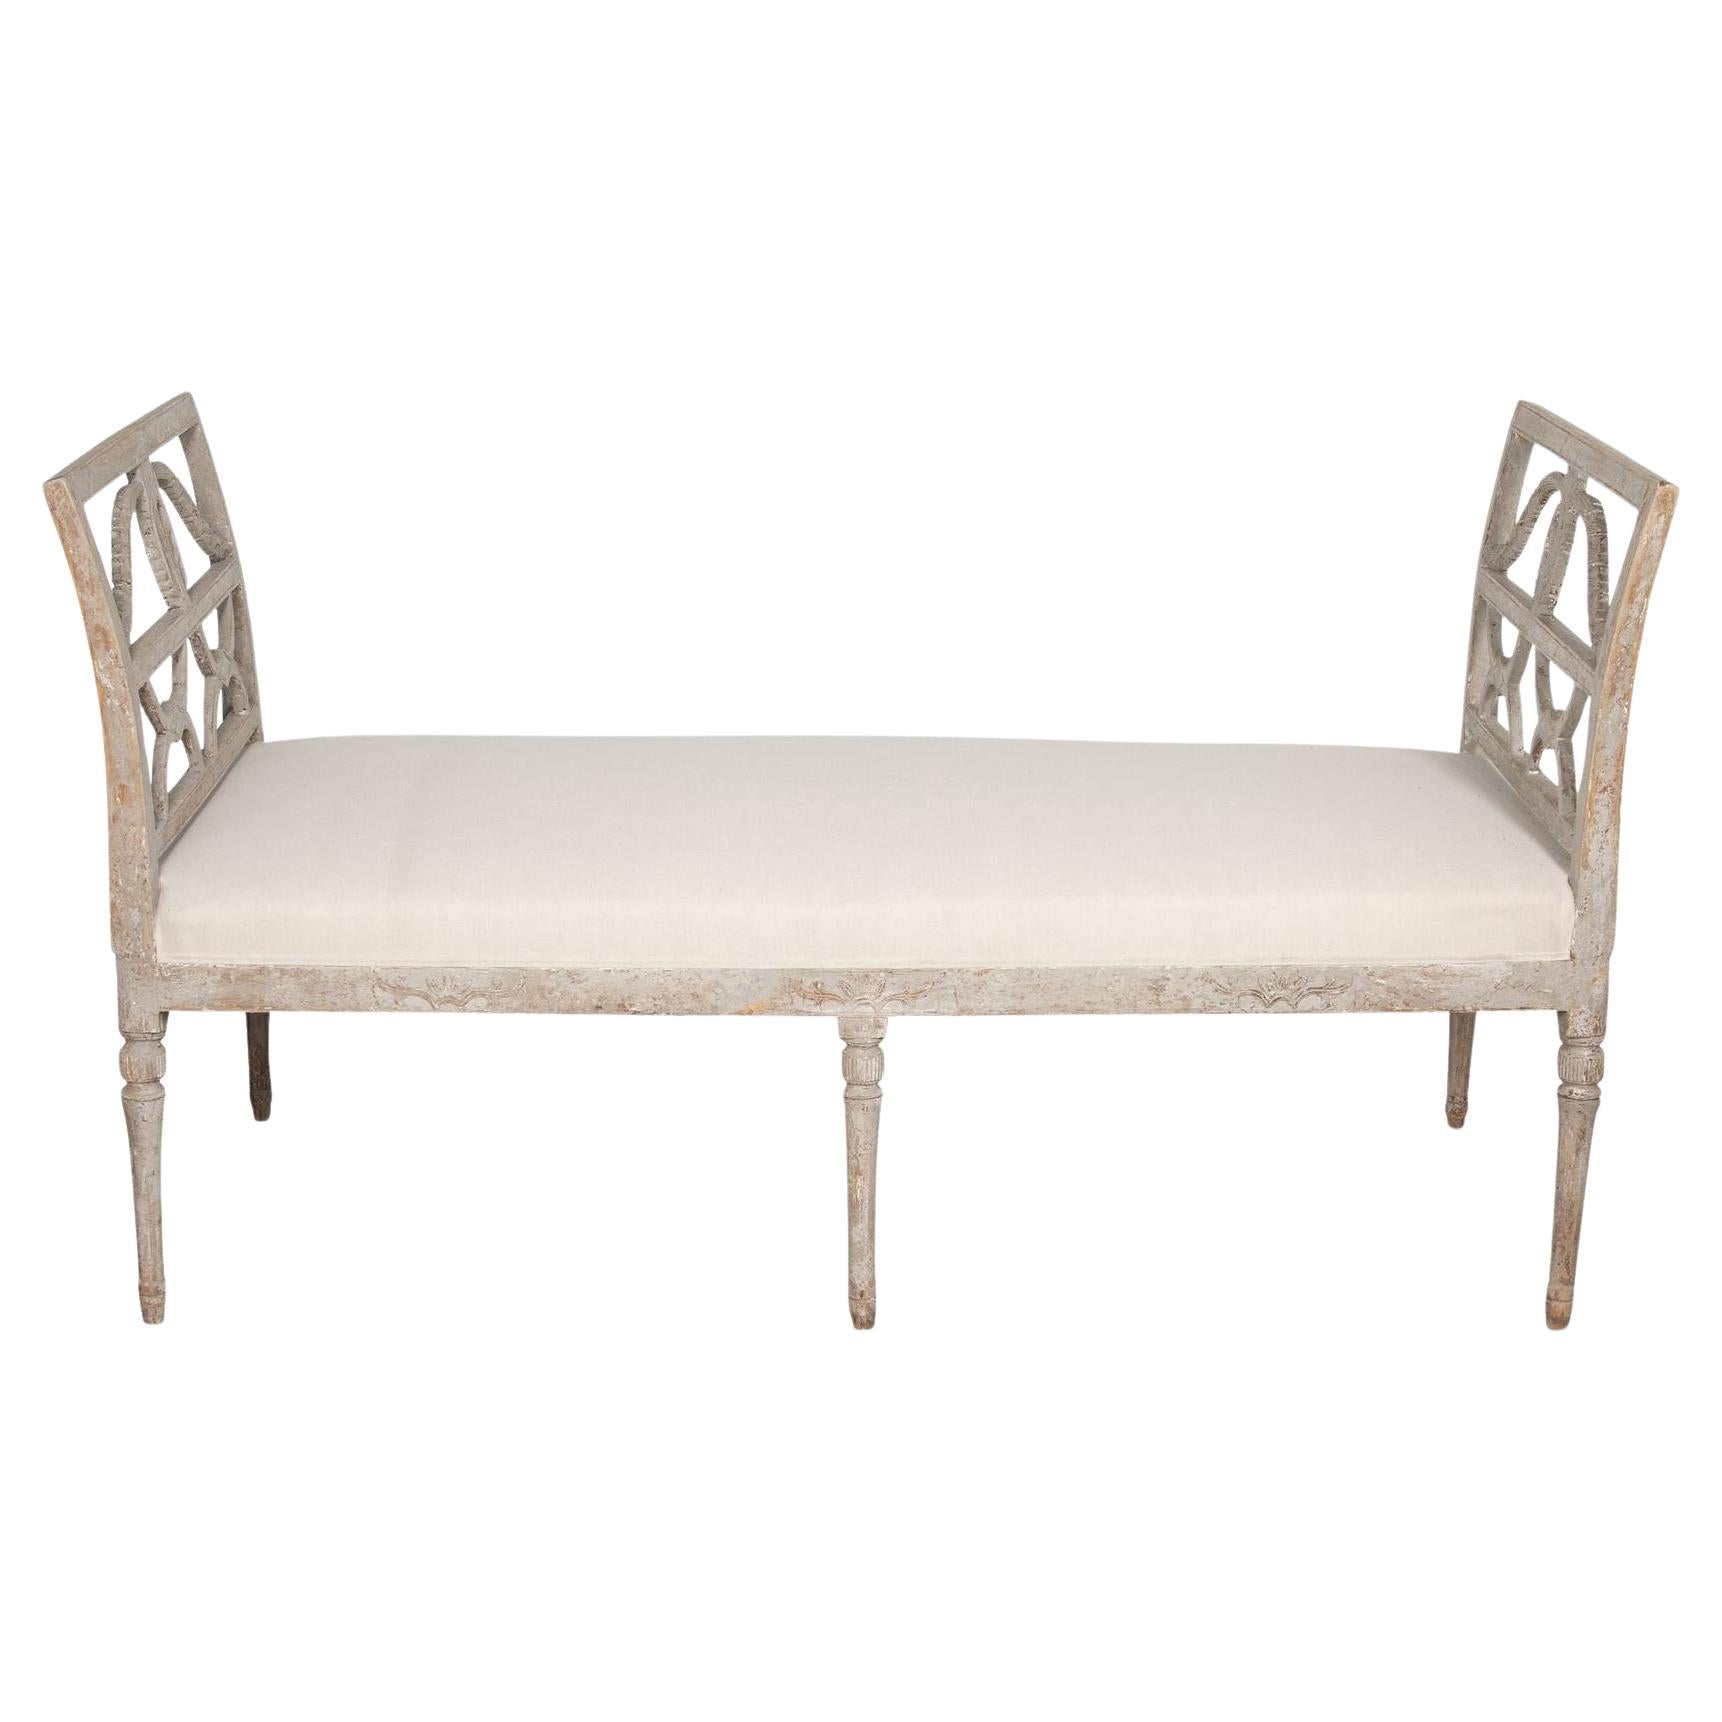 19th Century Gustavian Period Bench For Sale